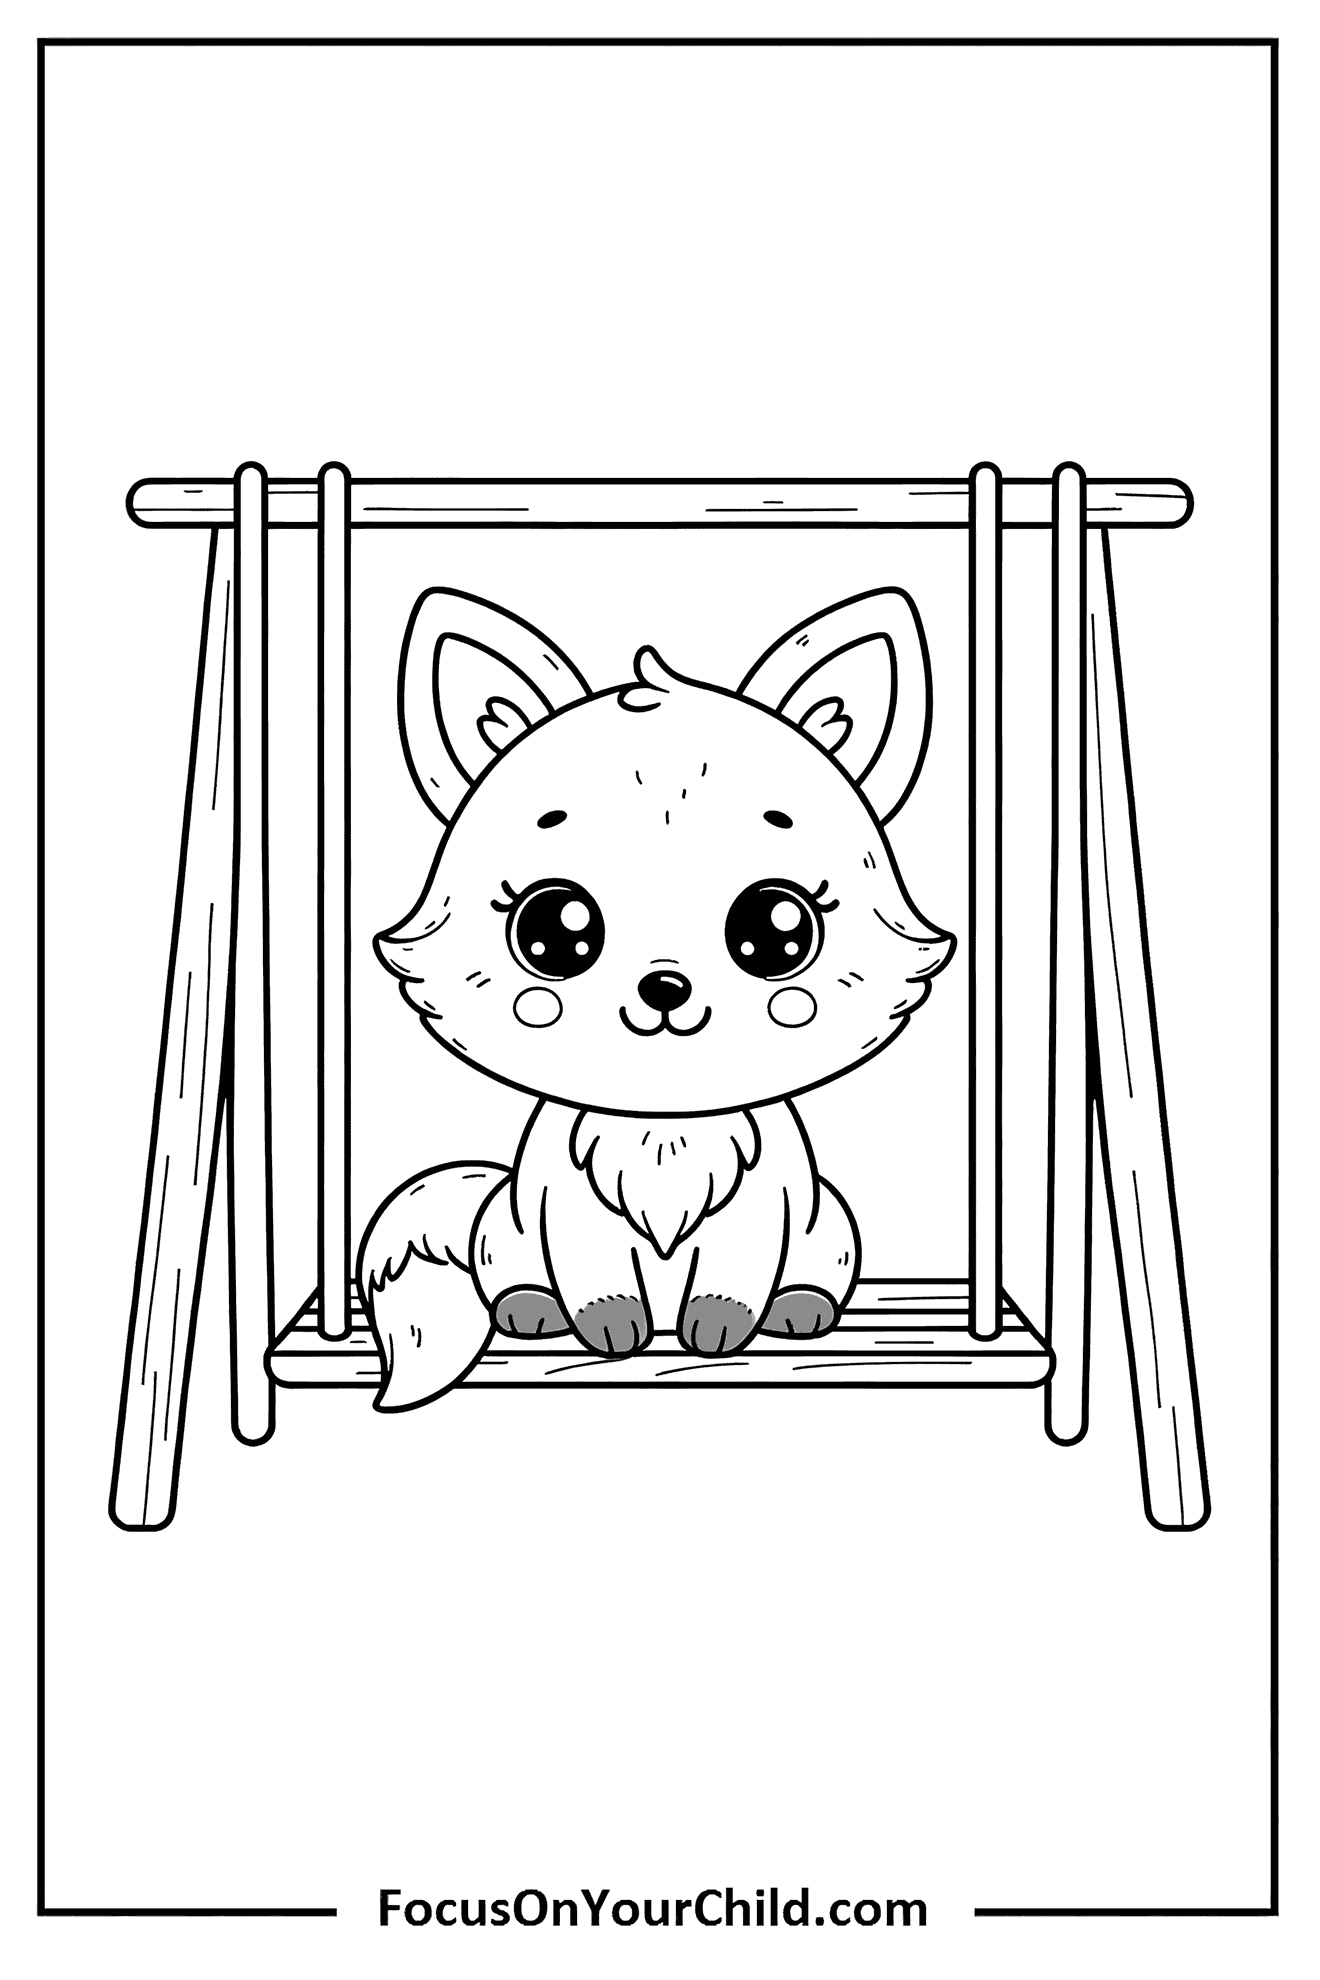 Cute fox on swing, charmingly drawn, with FocusOnYourChild.com text at bottom.